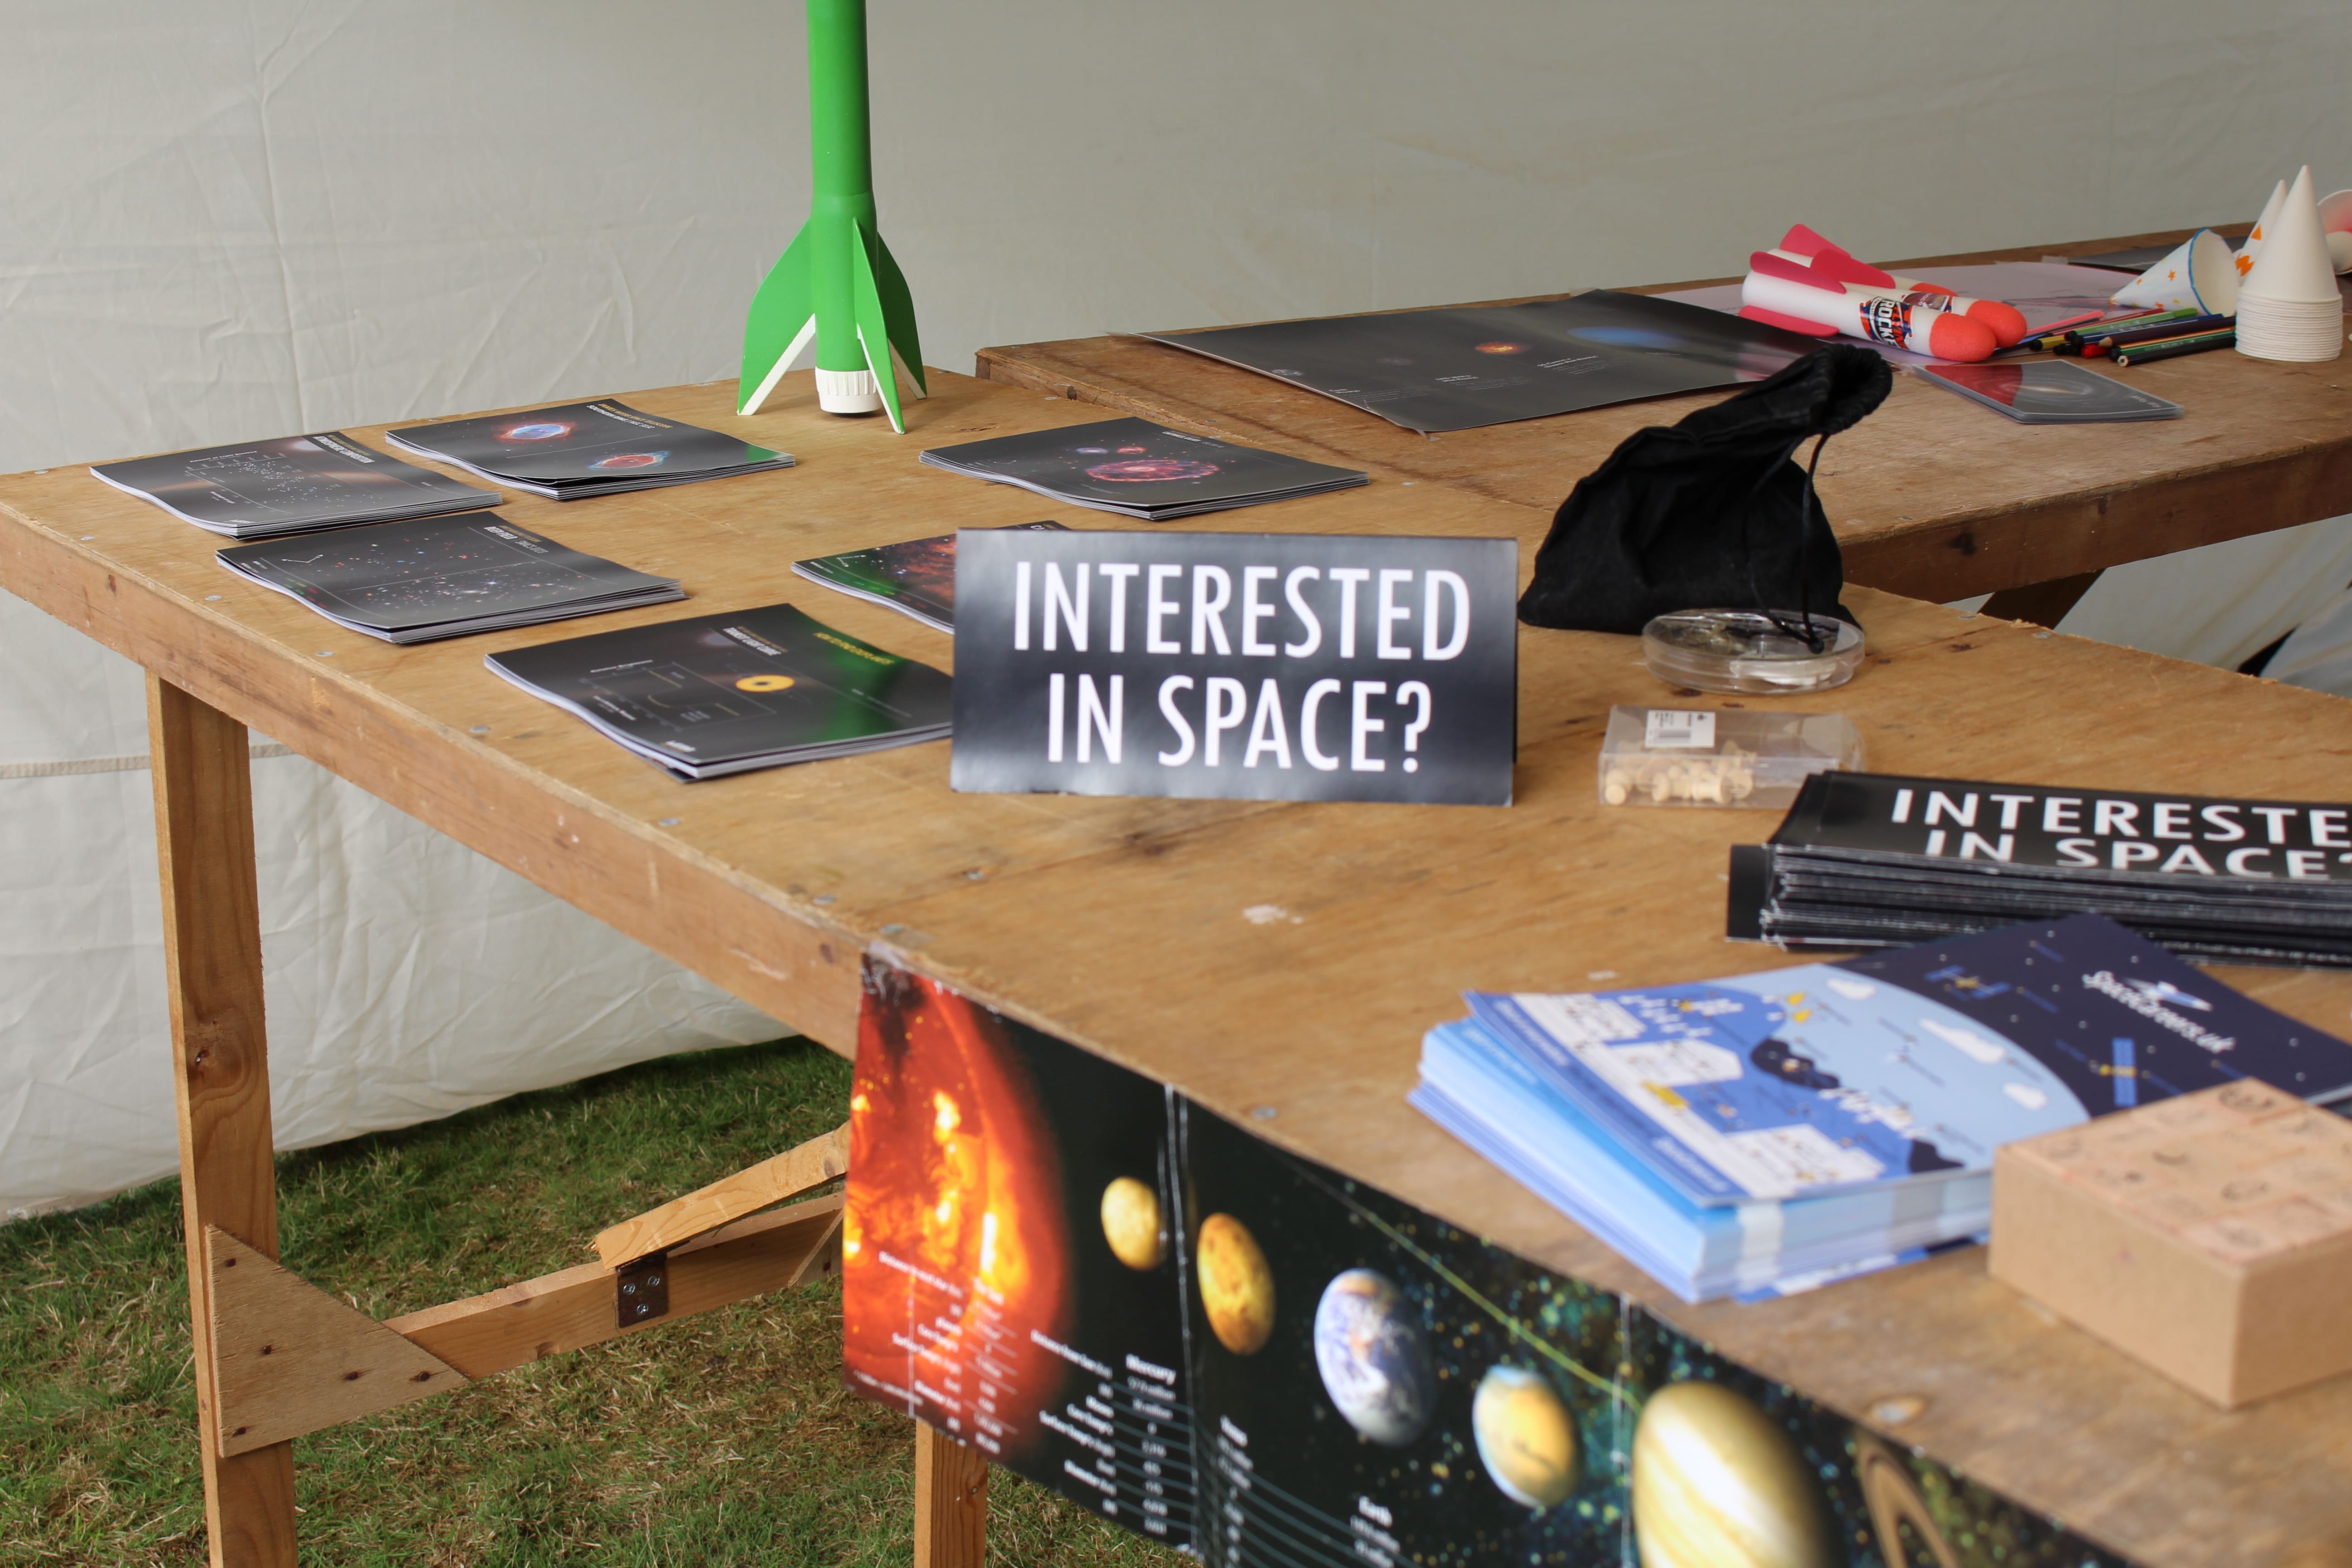 An image of our outreach stall at the Sidmouth Science Festival 2022 'Reach for the Skies' family day at the Norman Lockyer Observatory